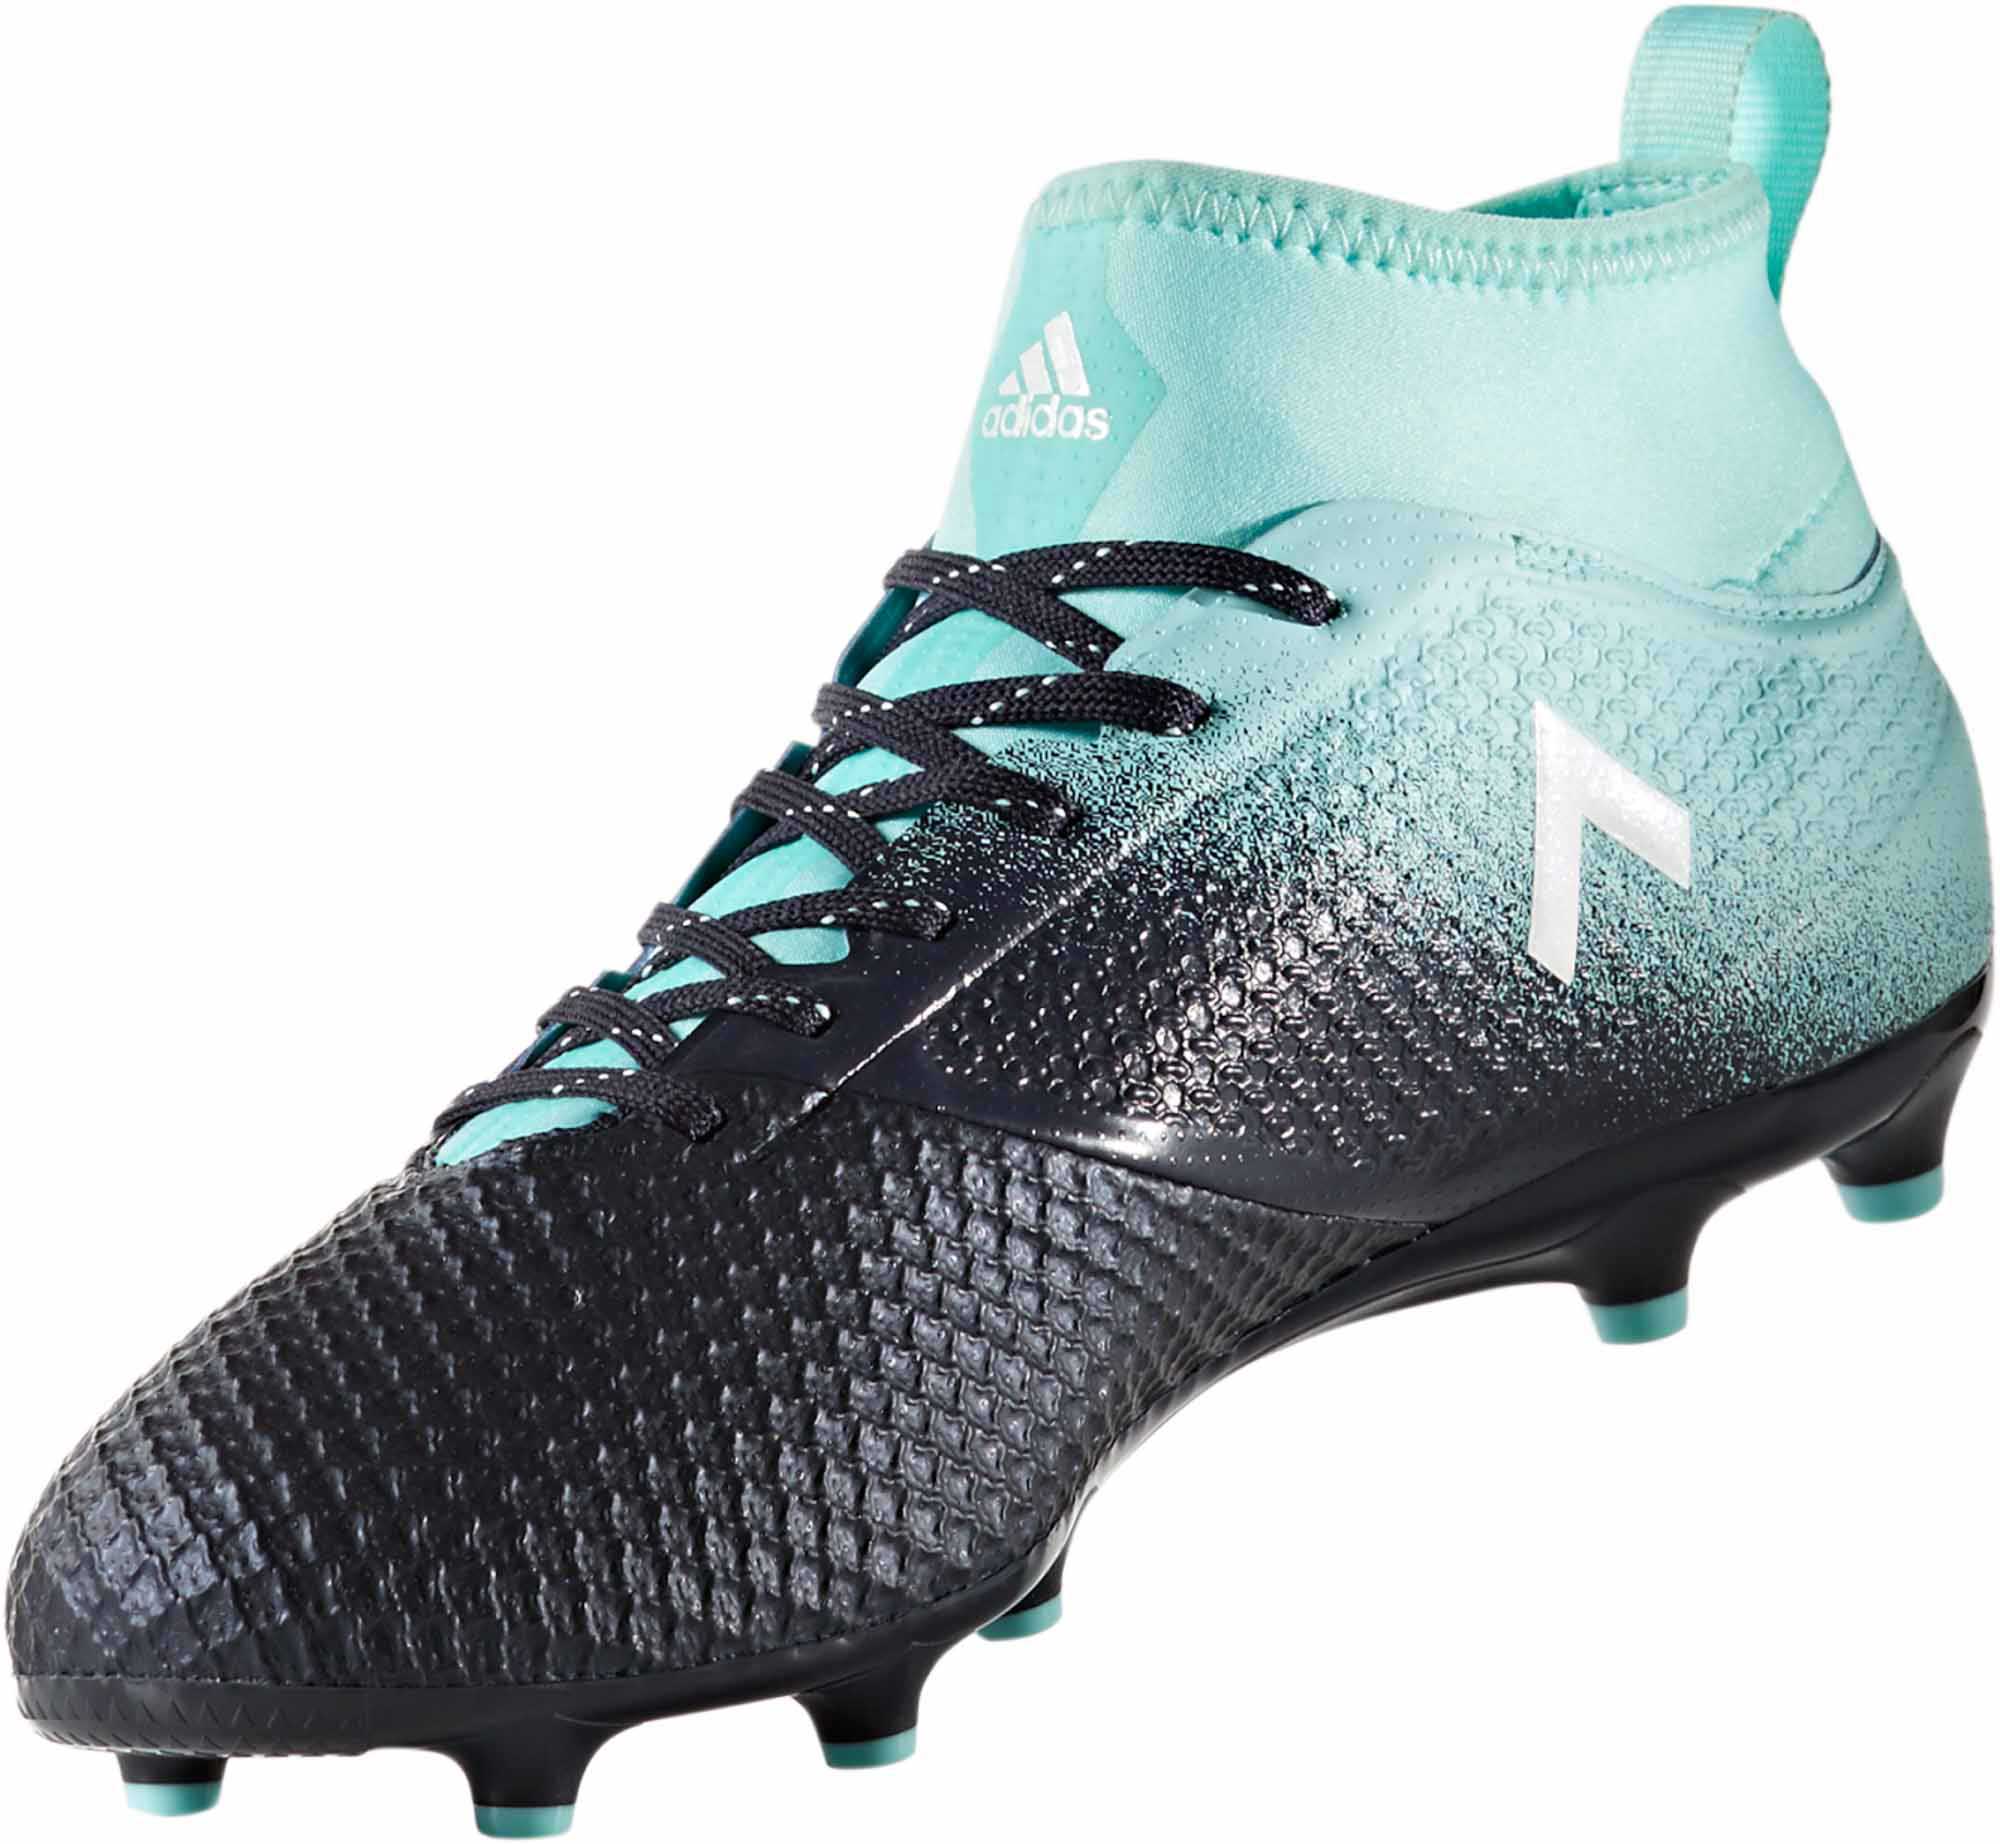 adidas ace soccer cleats